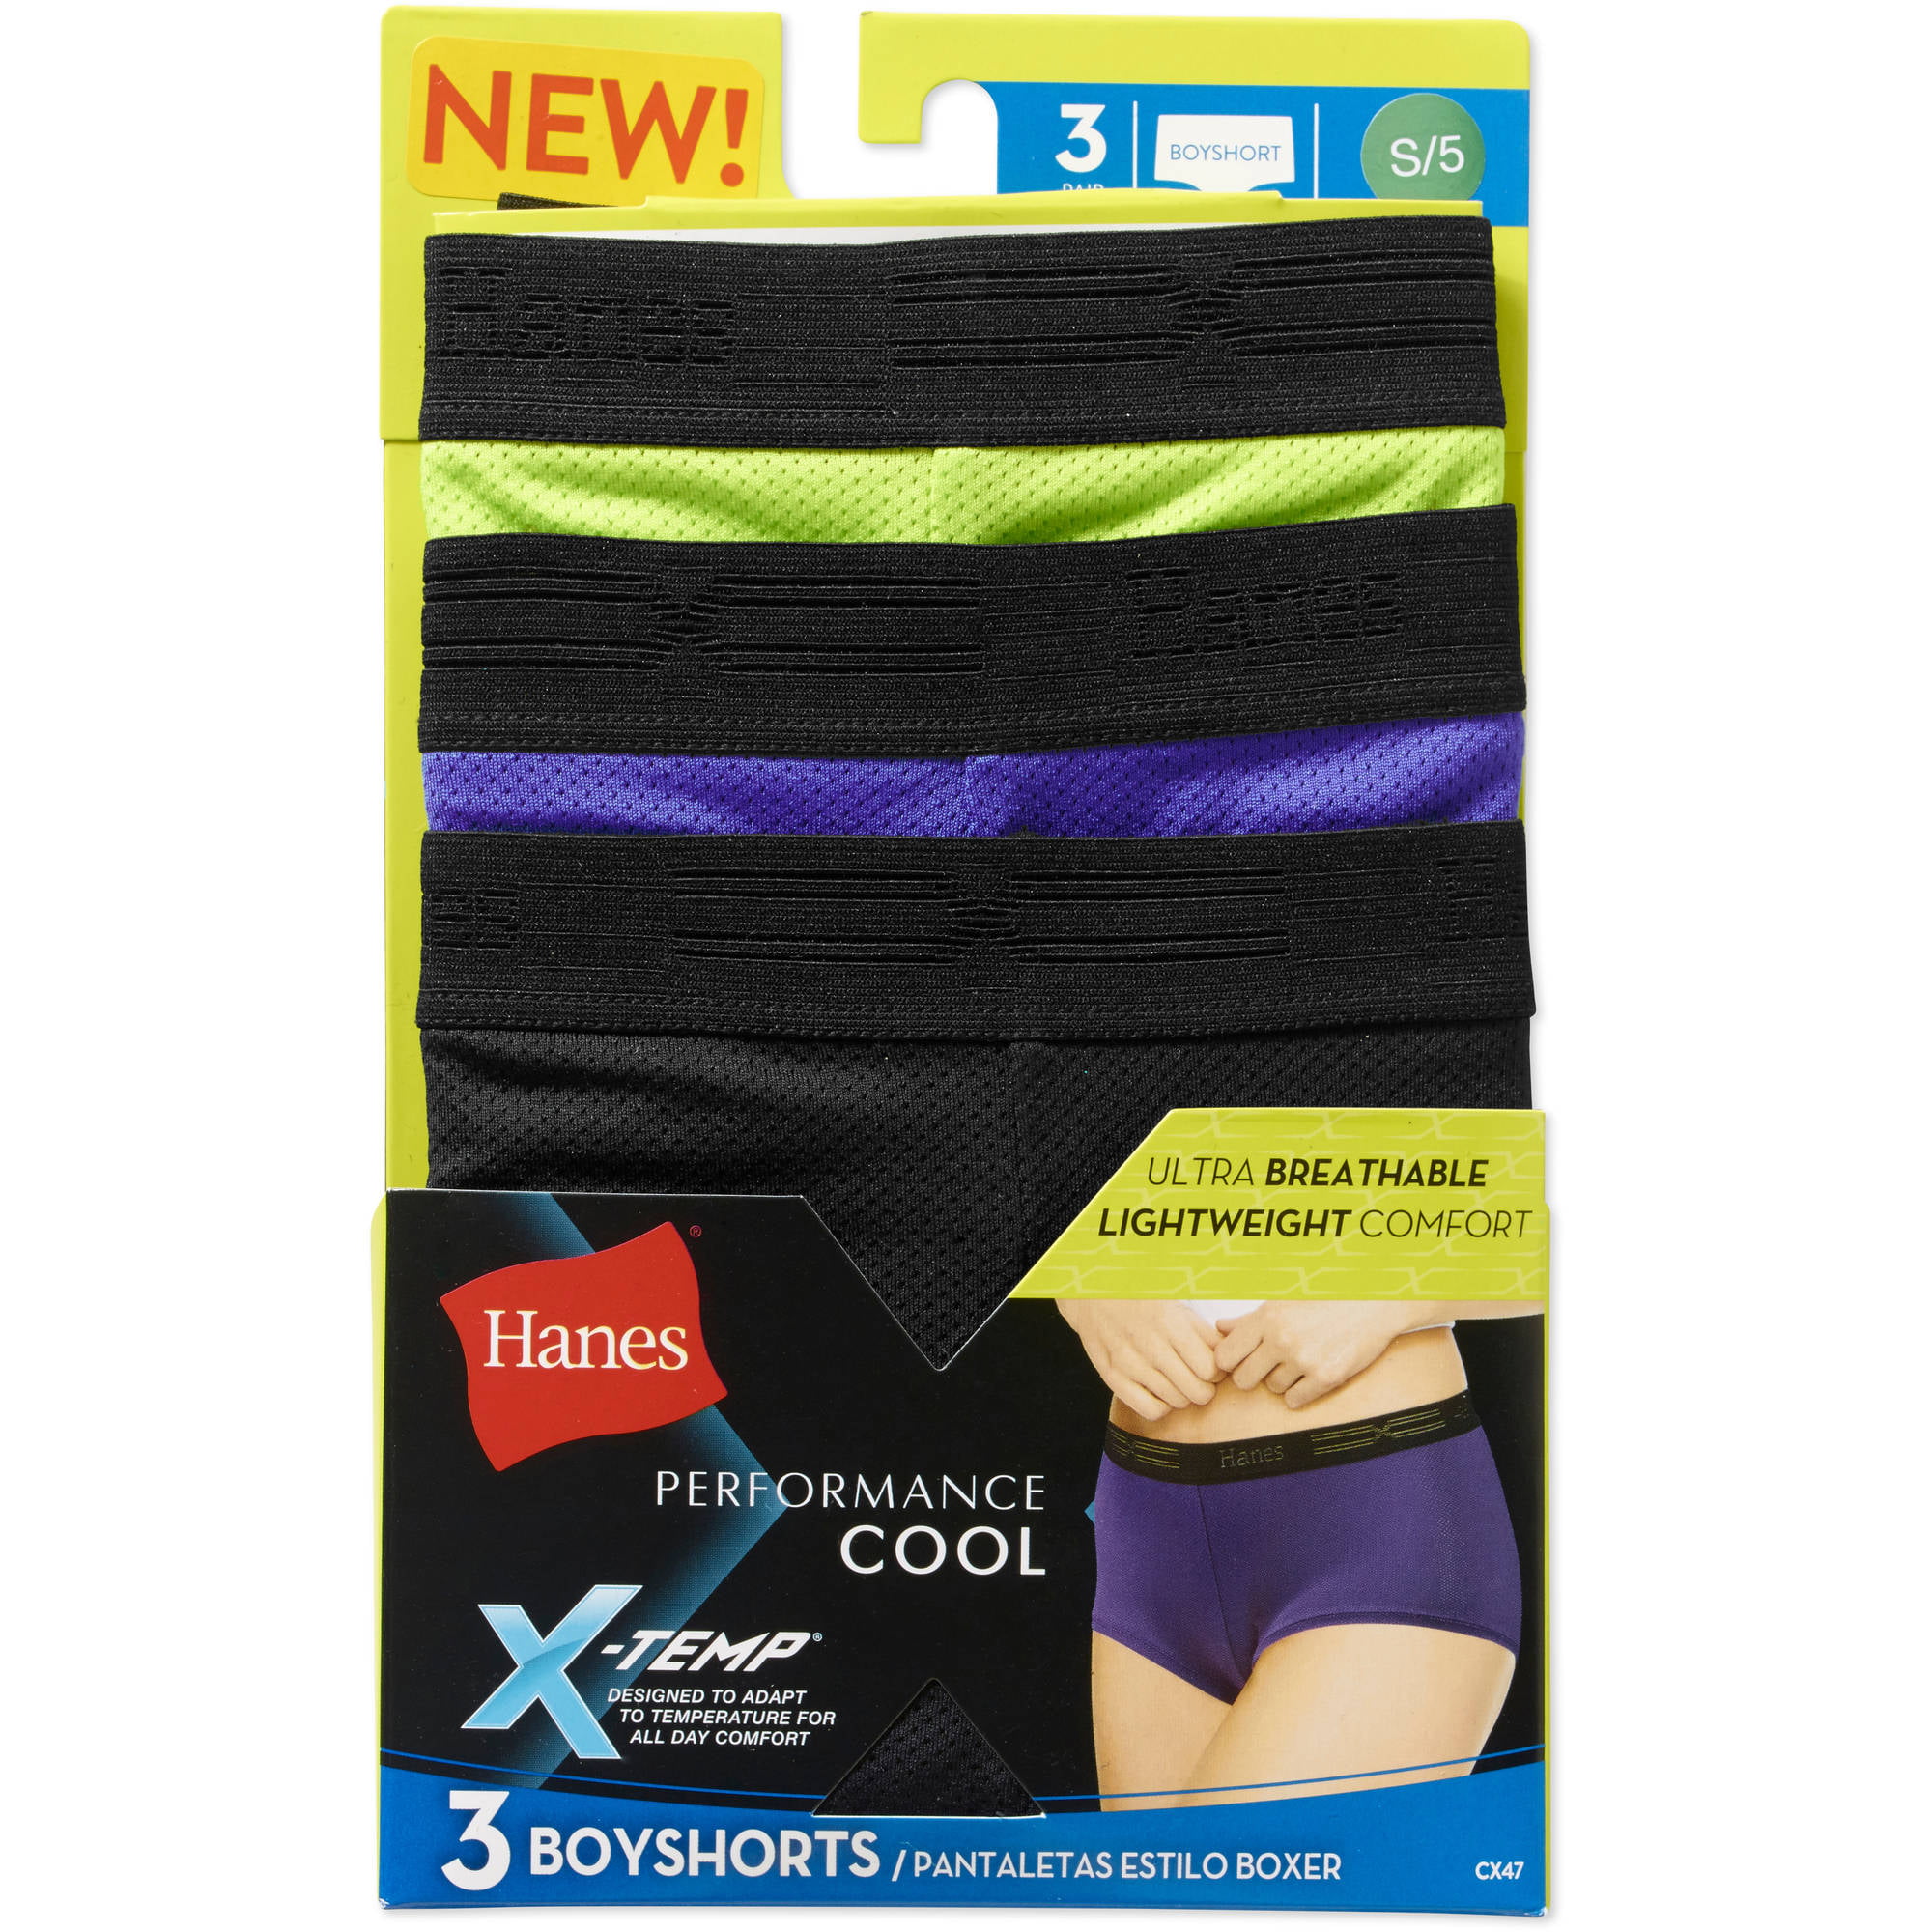 Hanes Womens Performance Cool X - Ships Directly From Hanes